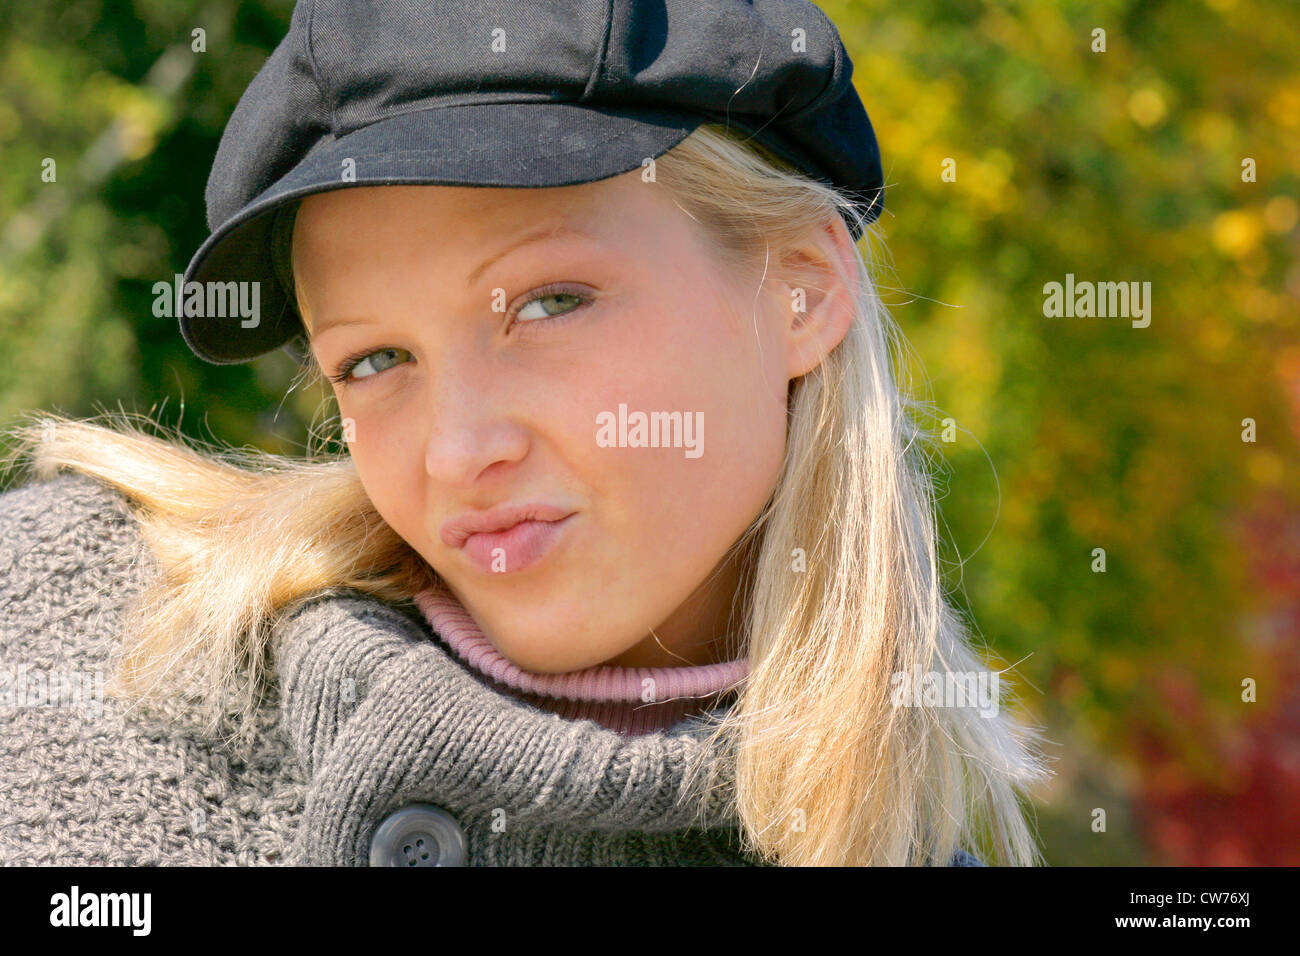 young blond sulky girl with cap Stock Photo